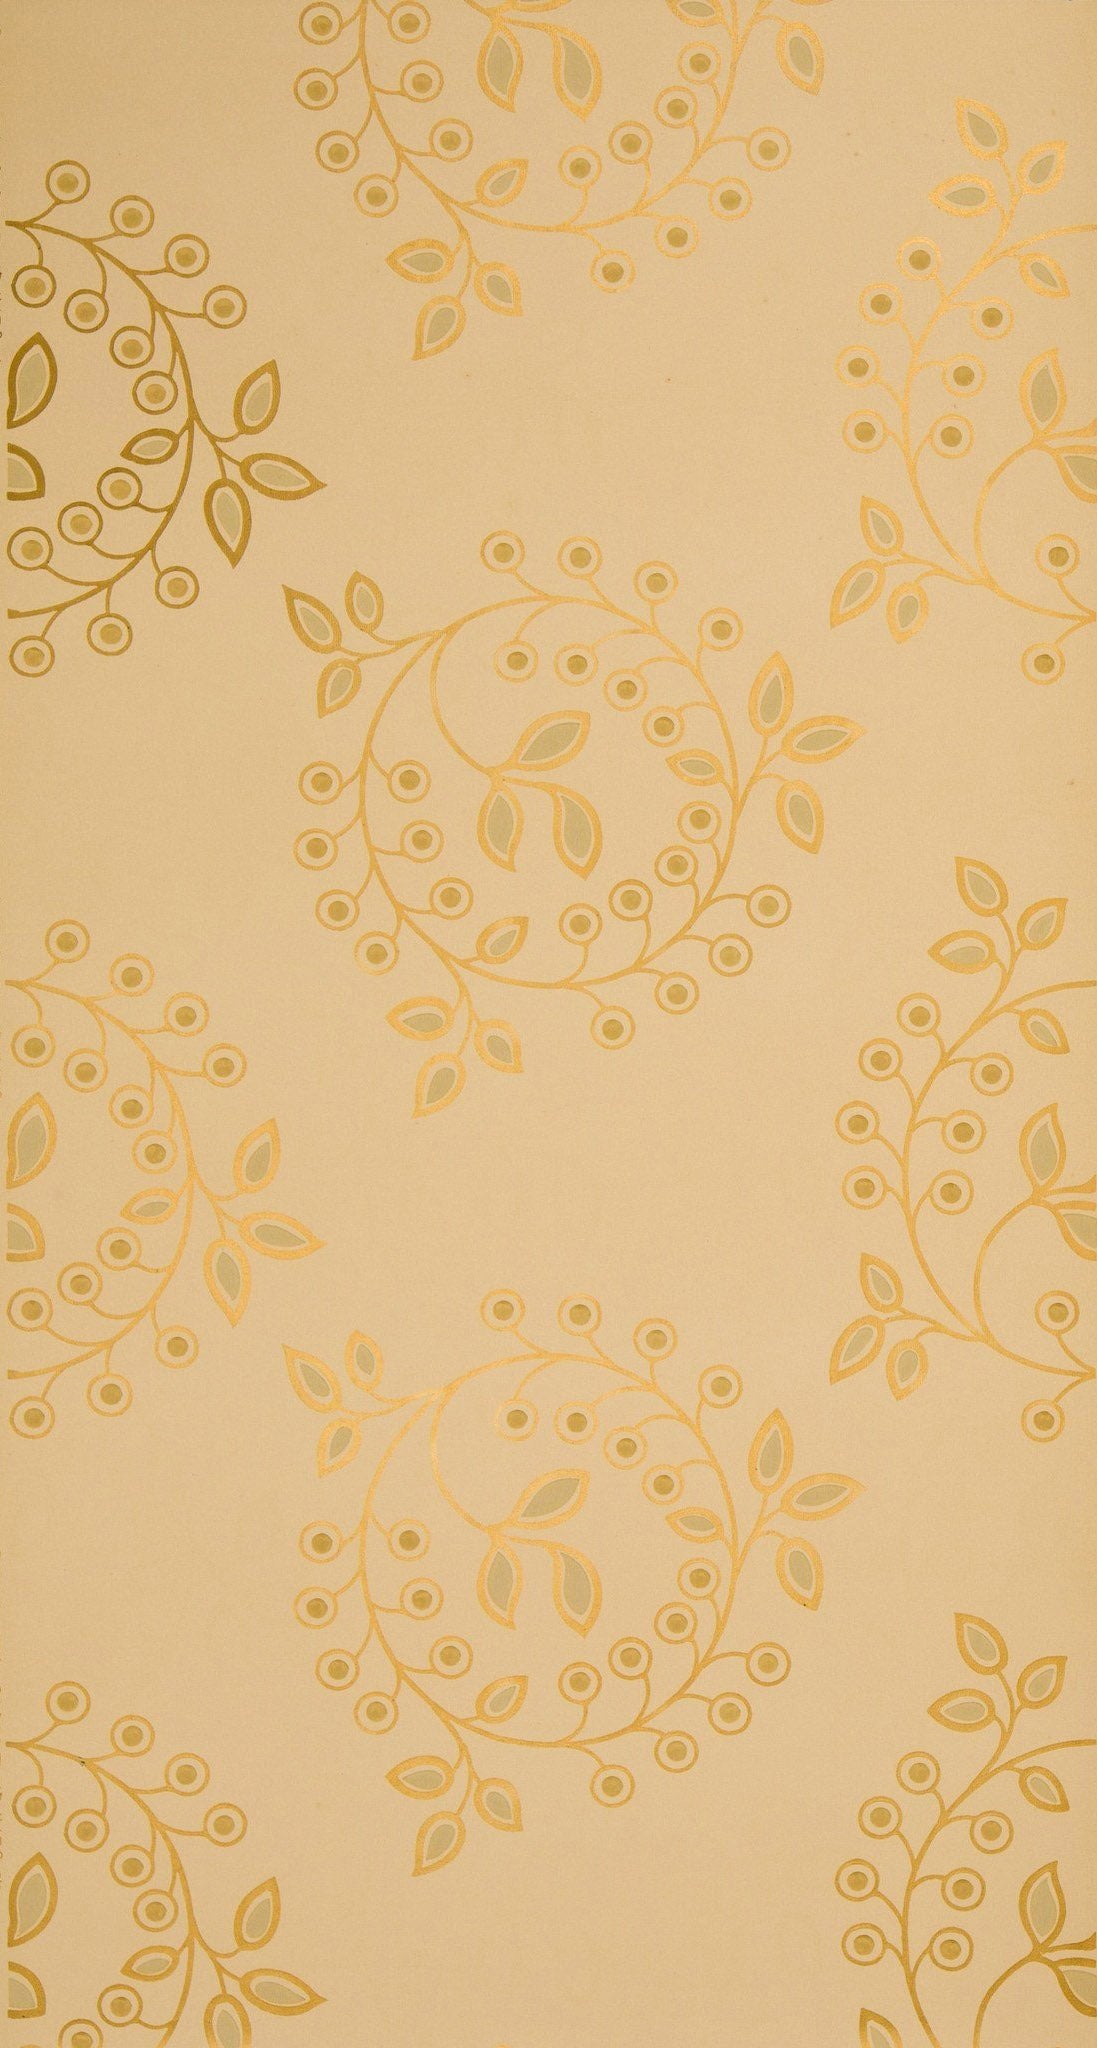 The wallpaper remnant the center pattern of this floorcloth is based on.  From Bolling & Company's antique wallpaper archive.